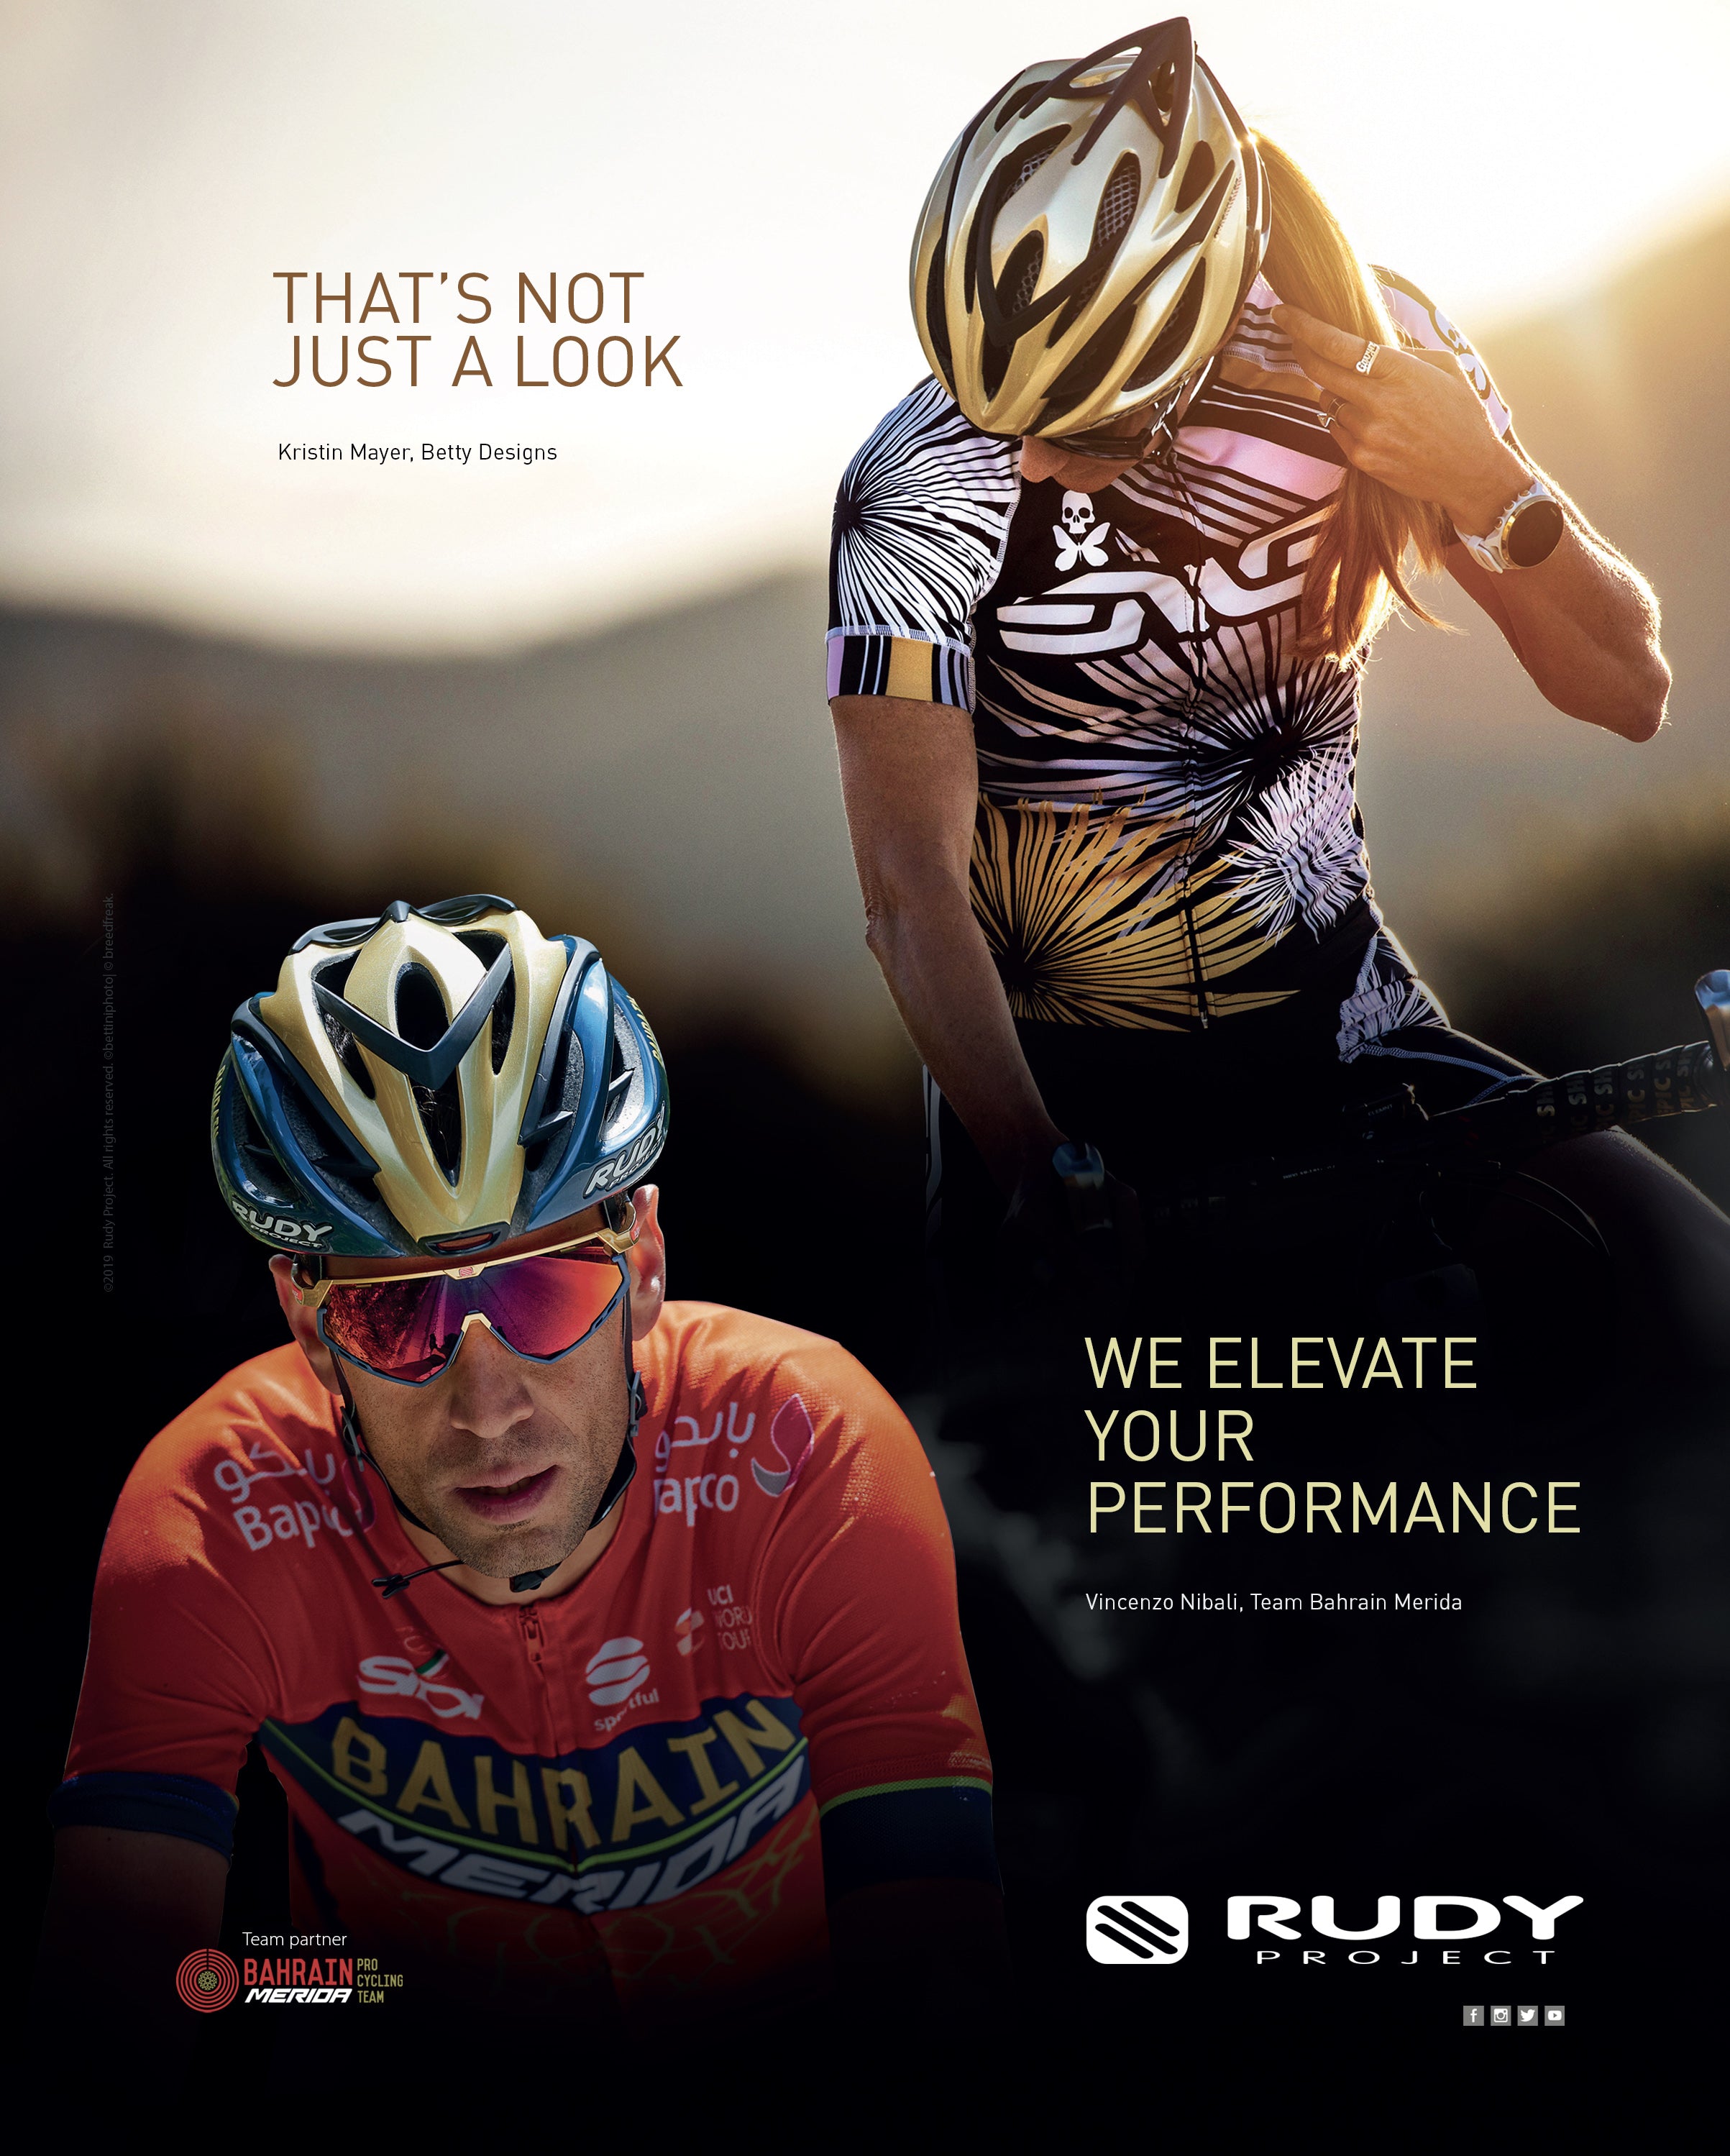 BETTY FEATURED IN RUDY PROJECT AD CAMPAIGN ALONGSIDE TOUR DE FRANCE WINNER!